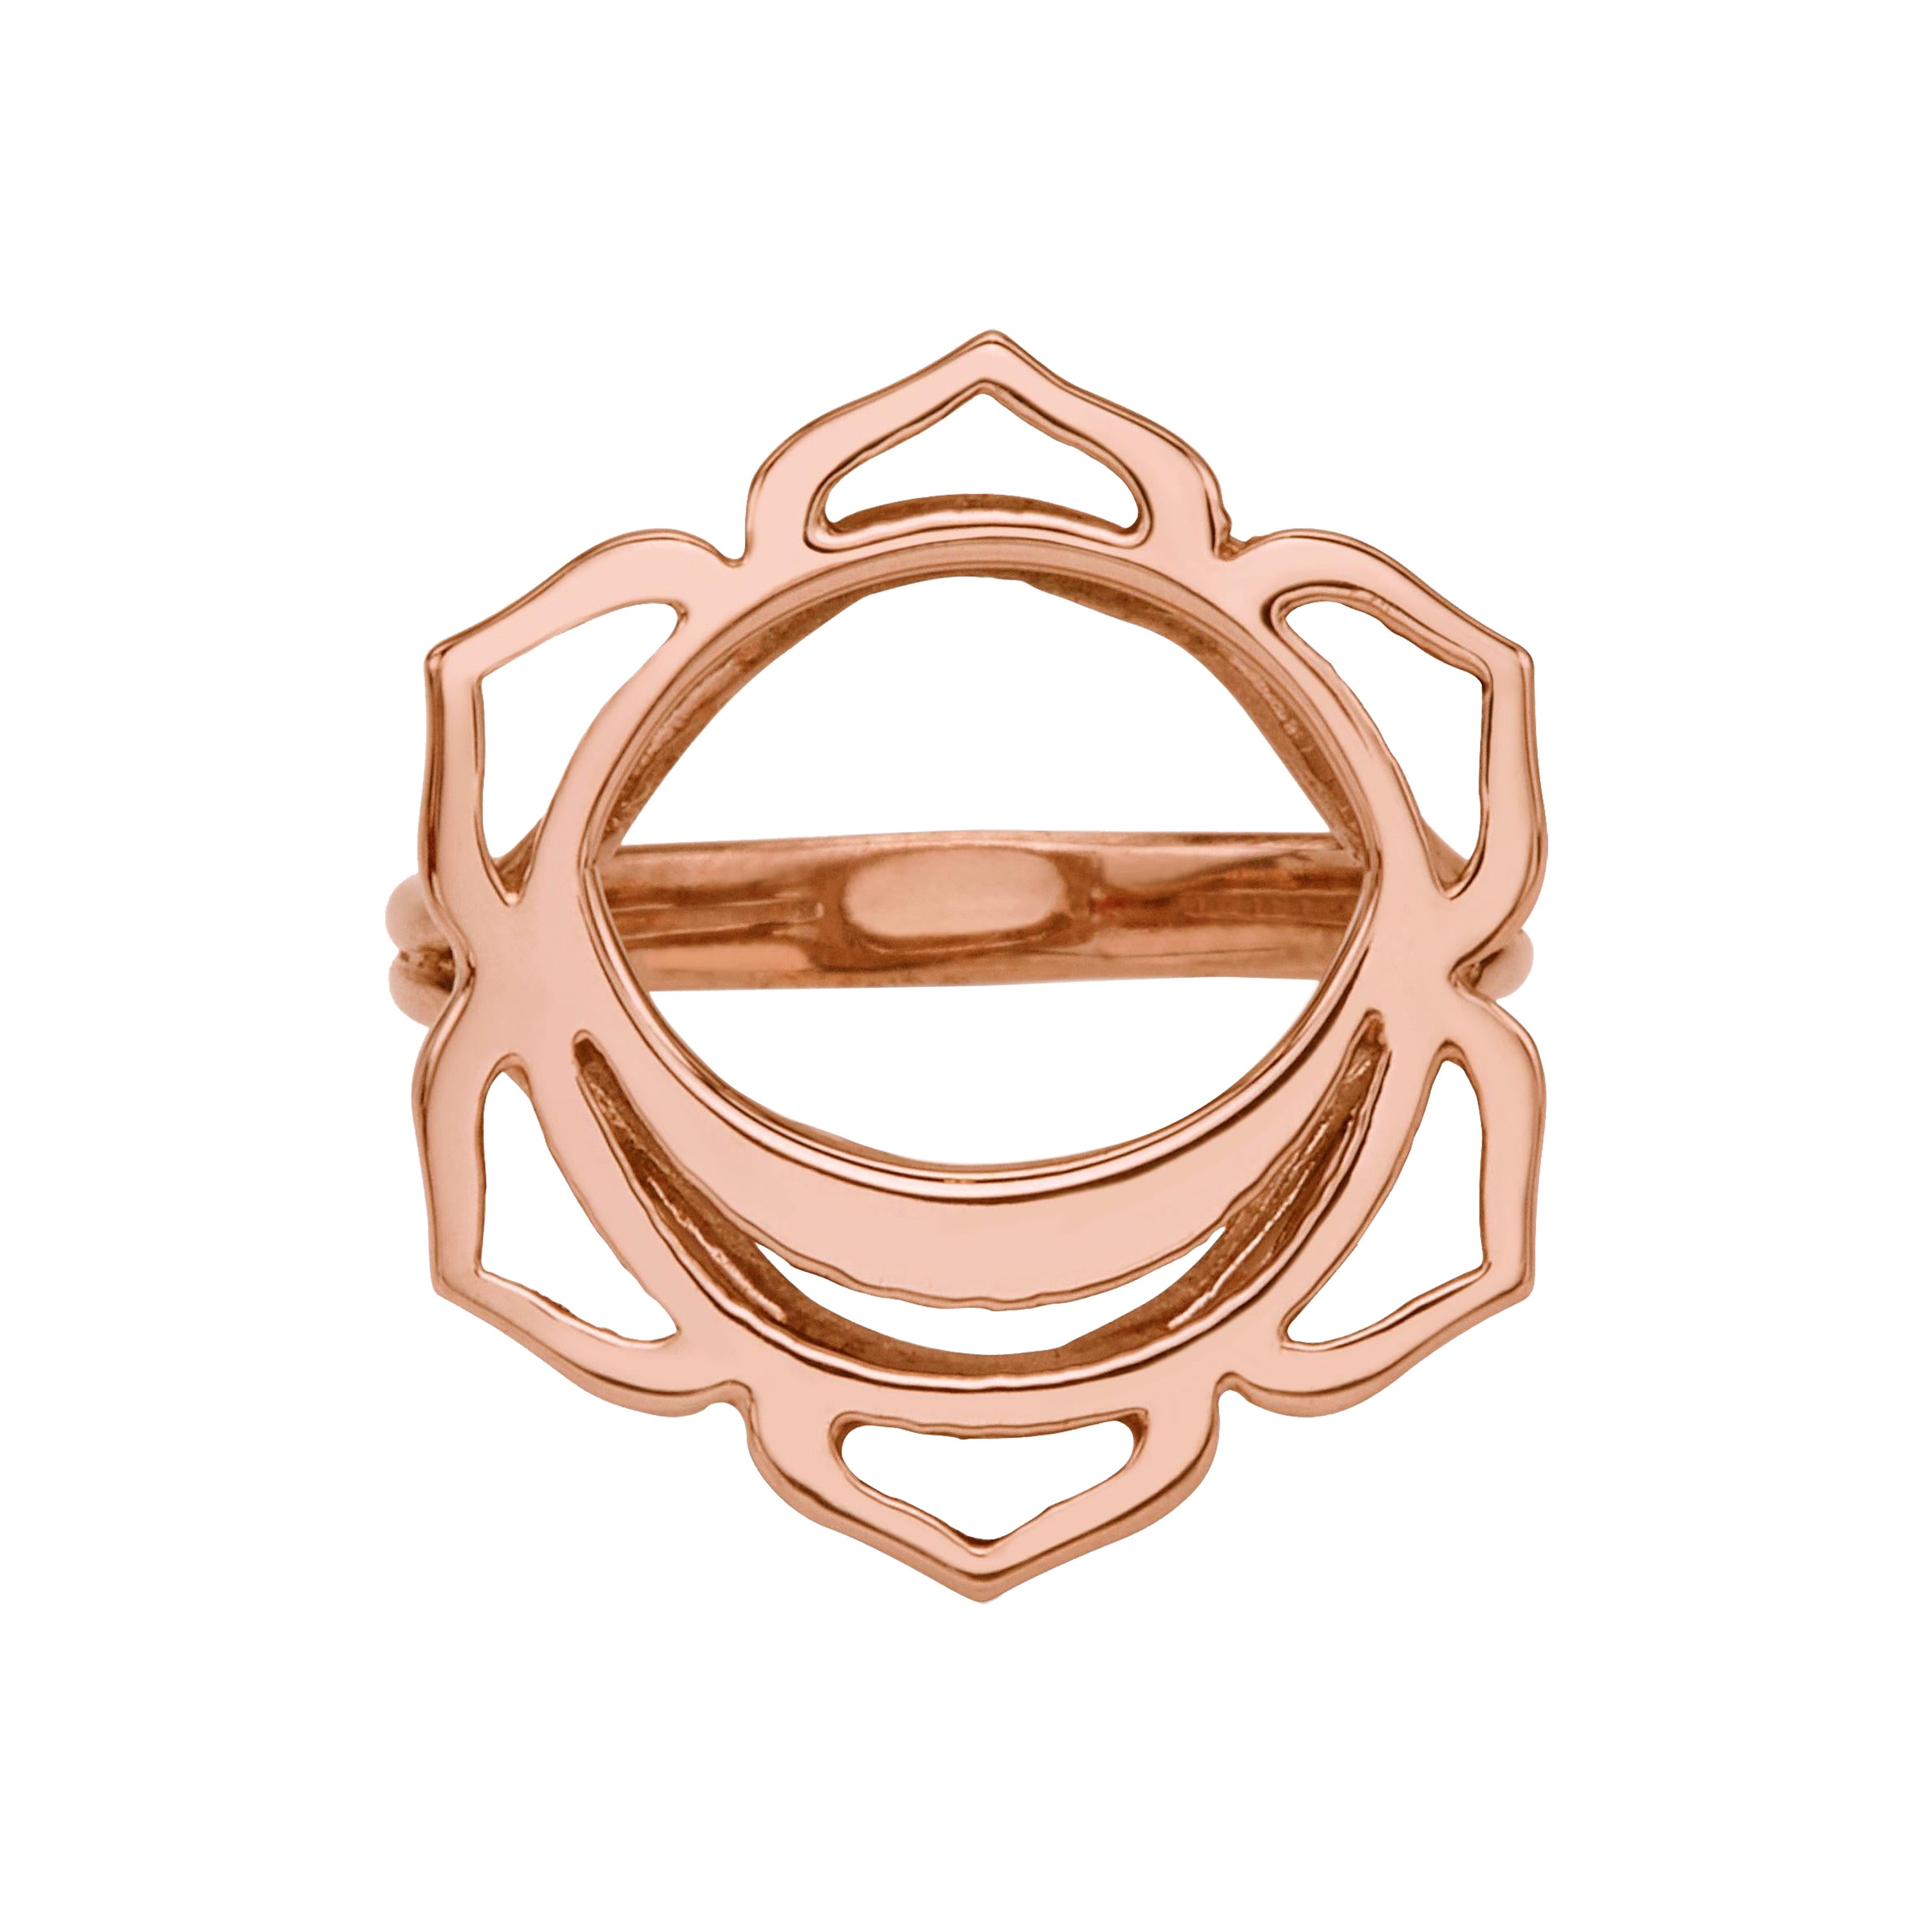 For Sale:  Handcrafted Yoga Ring with the Svadhisthana Sex Sacral Chakra in 14Kt Gold